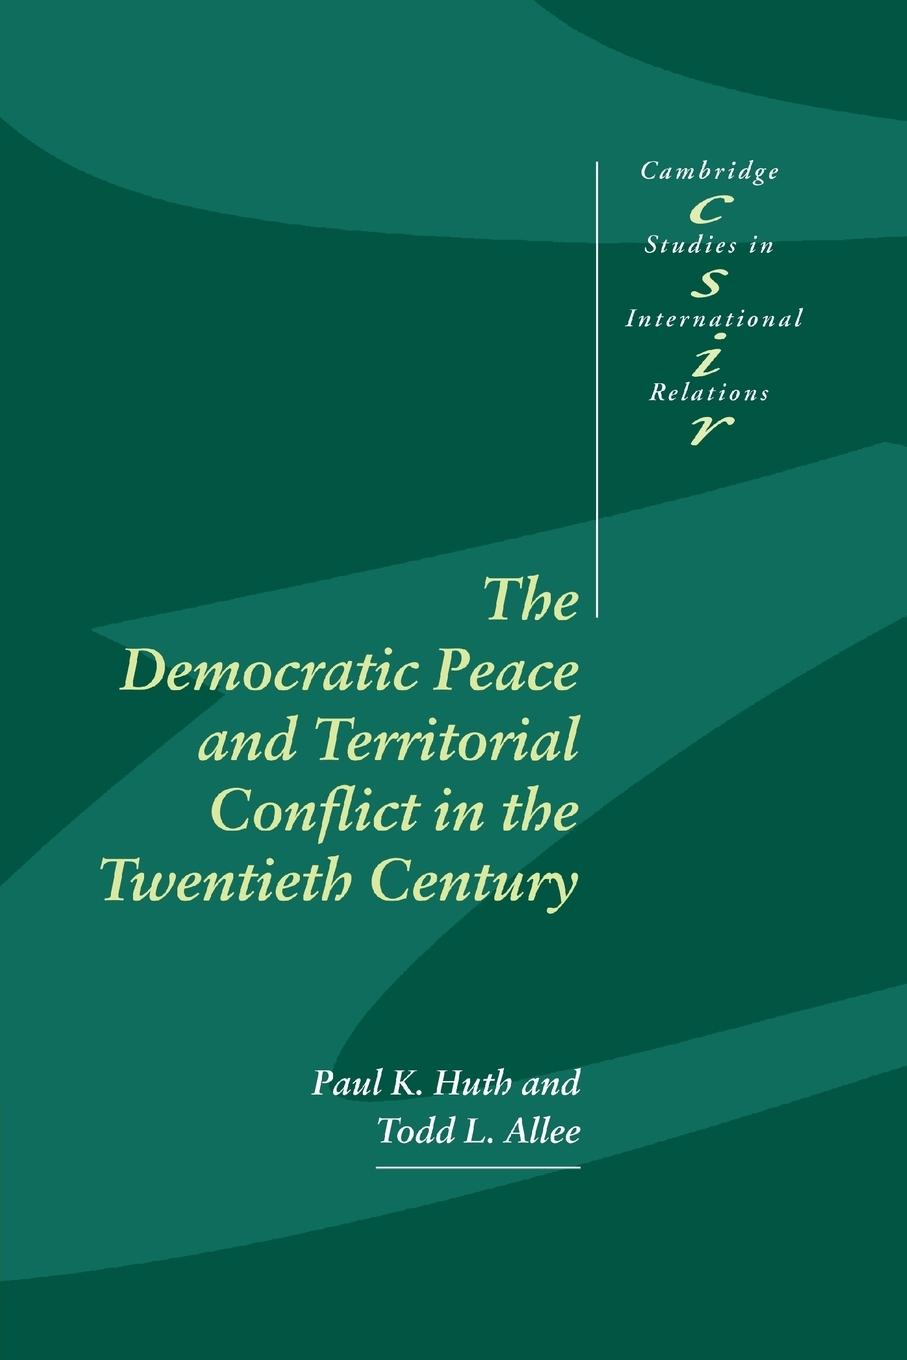 Democ Peace Territorial Conflct 20C - Huth, Paul K. Allee, Todd L.